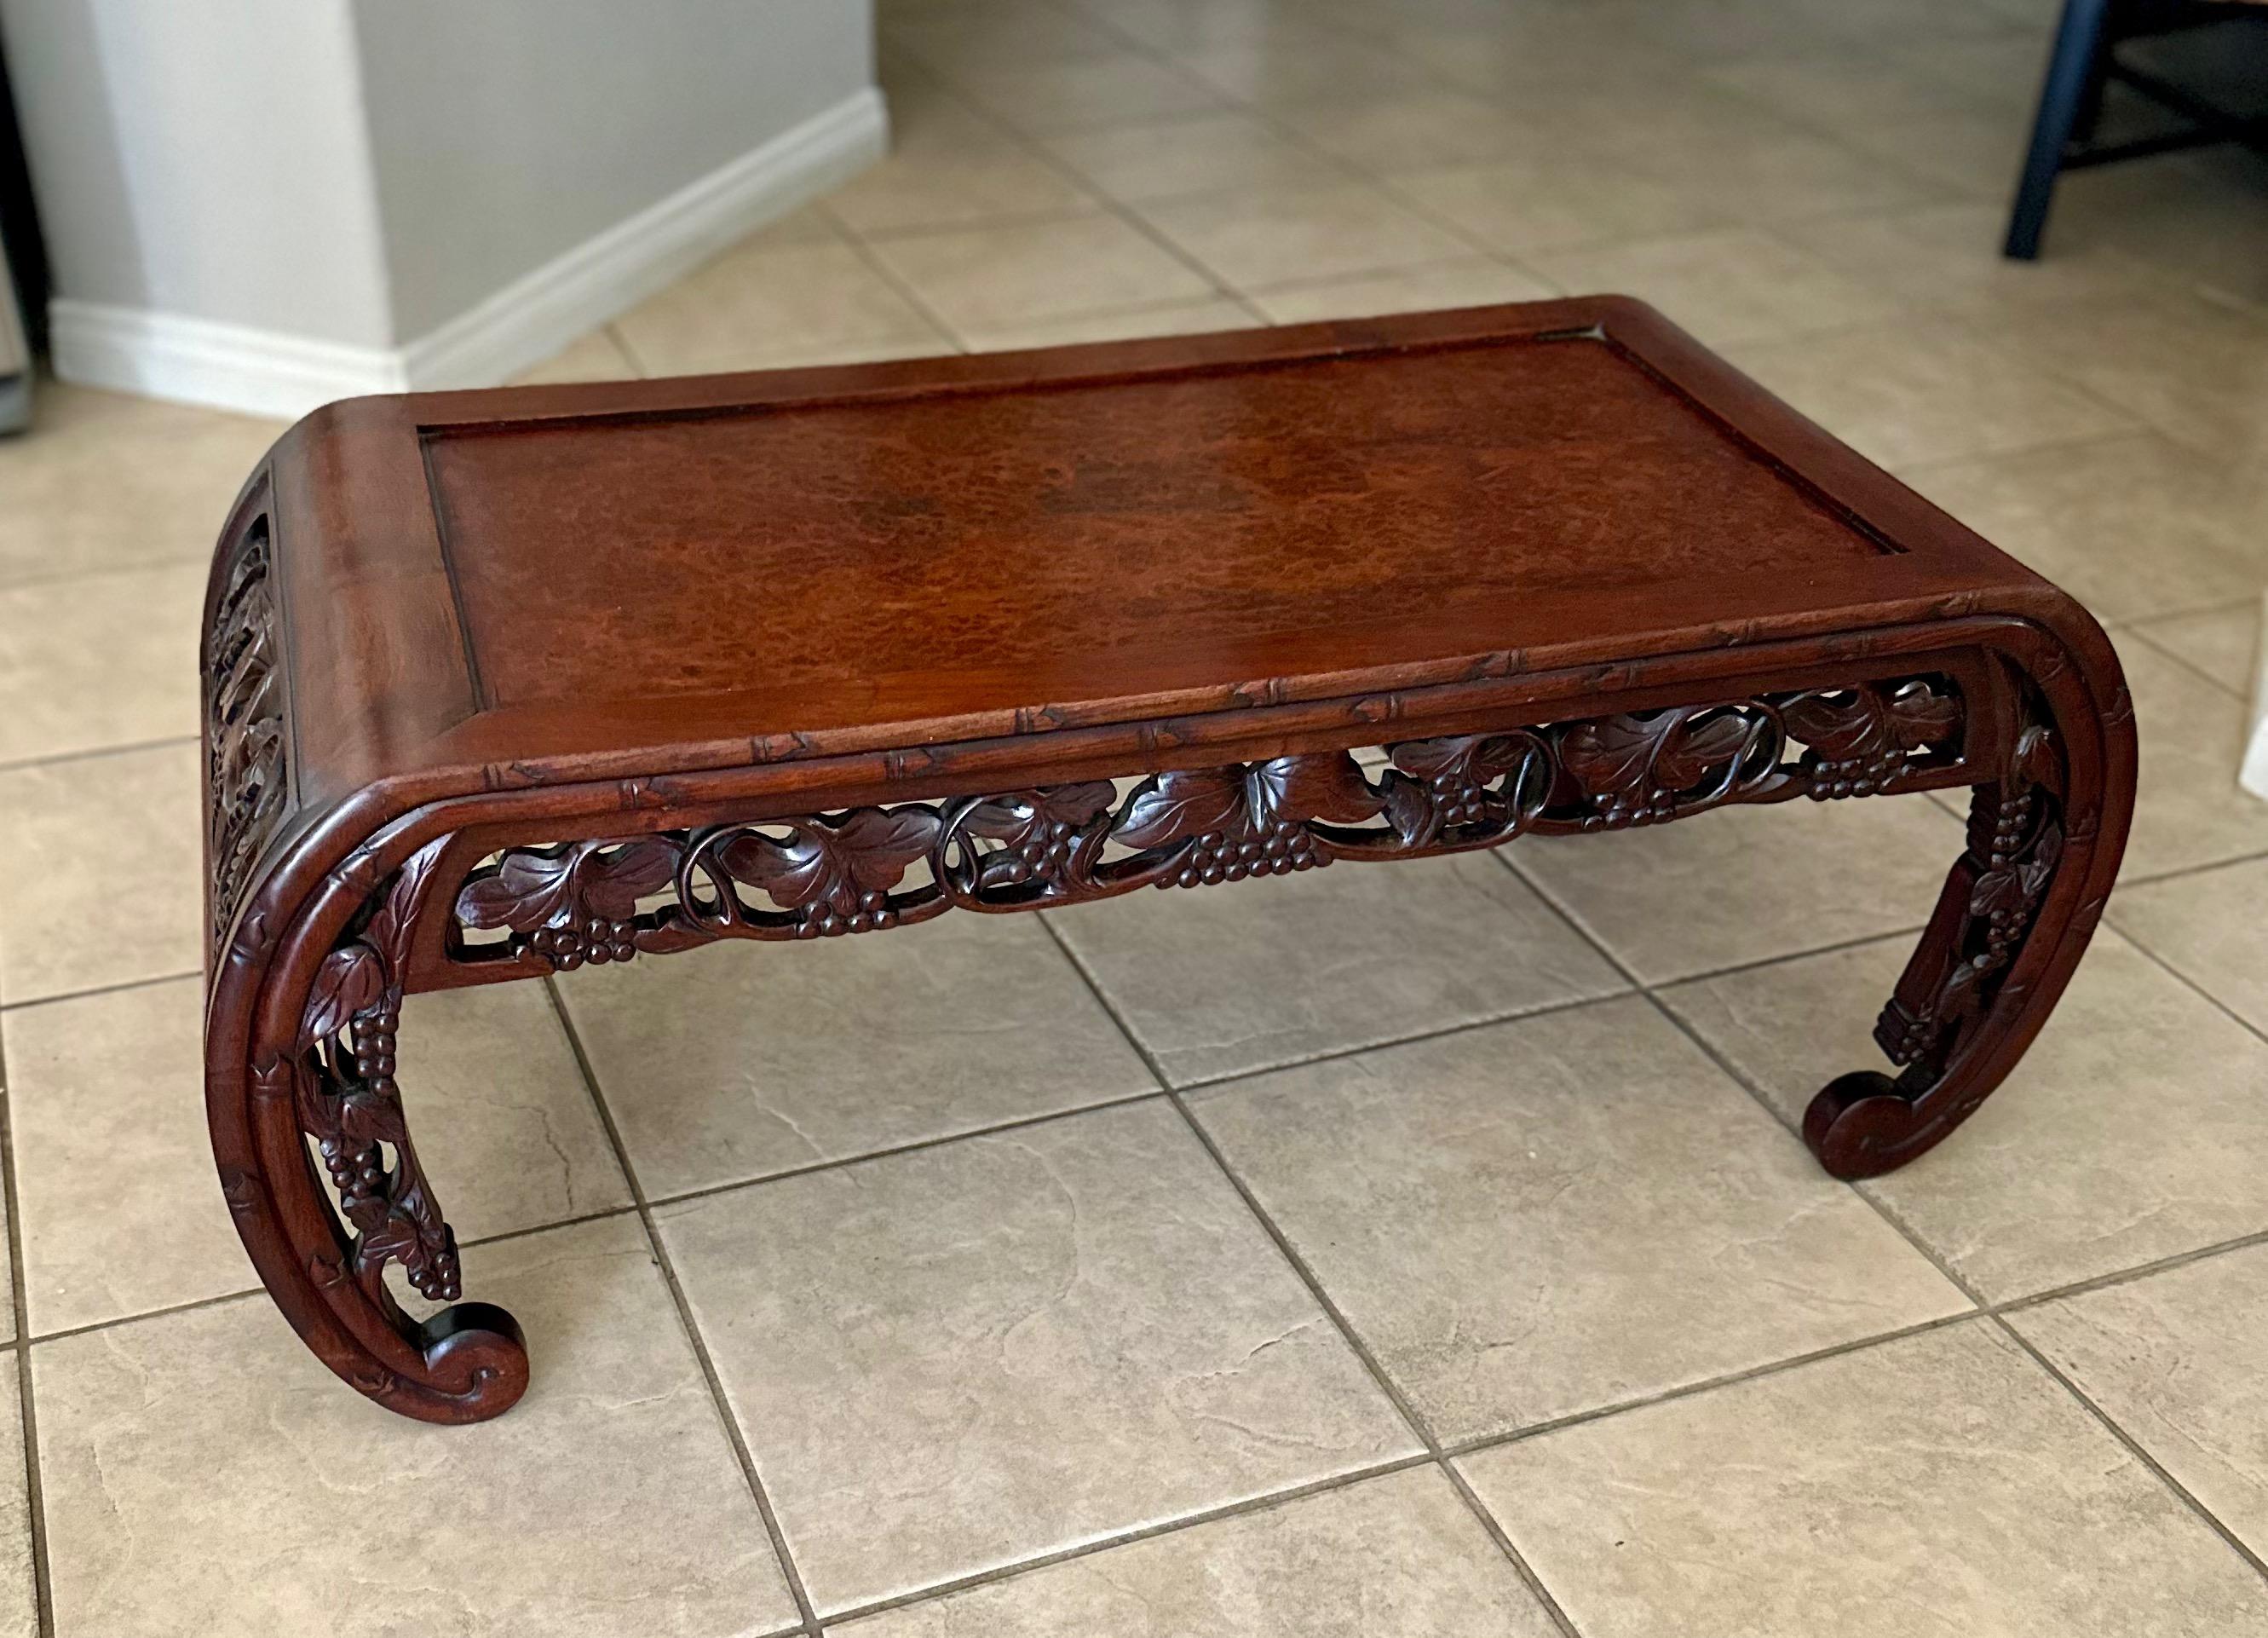 Late 19th century Chinese Asian hardwood low opium coffee table. Well crafted with beautiful oystered pattern veneer top, curved legs and carved pierced frieze throughout.  